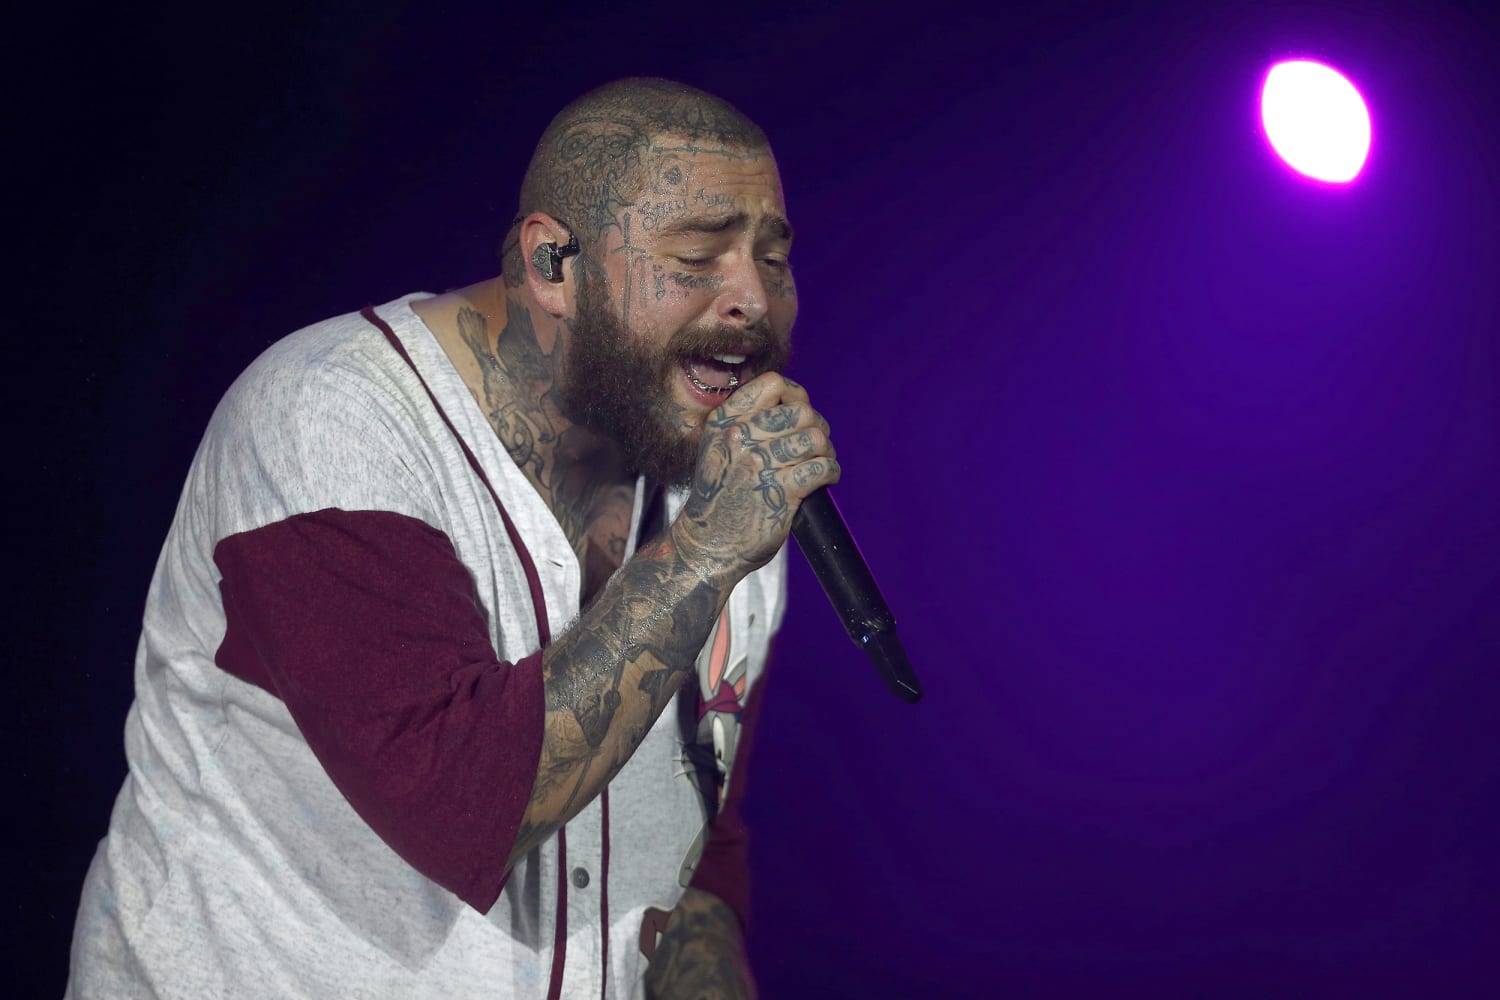 Post Malone hurt his ribs after falling into a hole on stage - see thenews